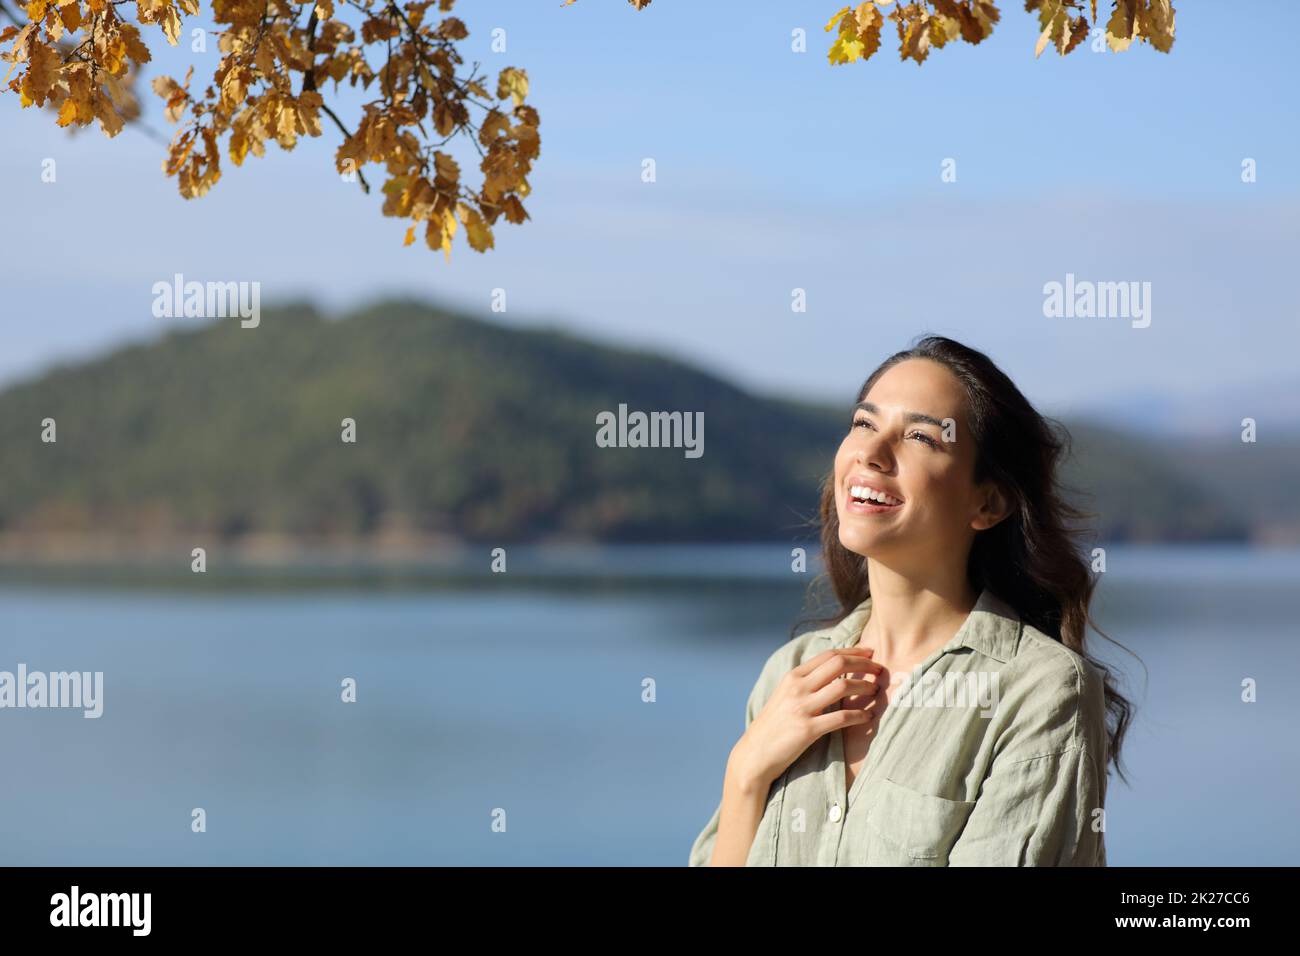 Amazed woman looking up in a lake on holiday Stock Photo